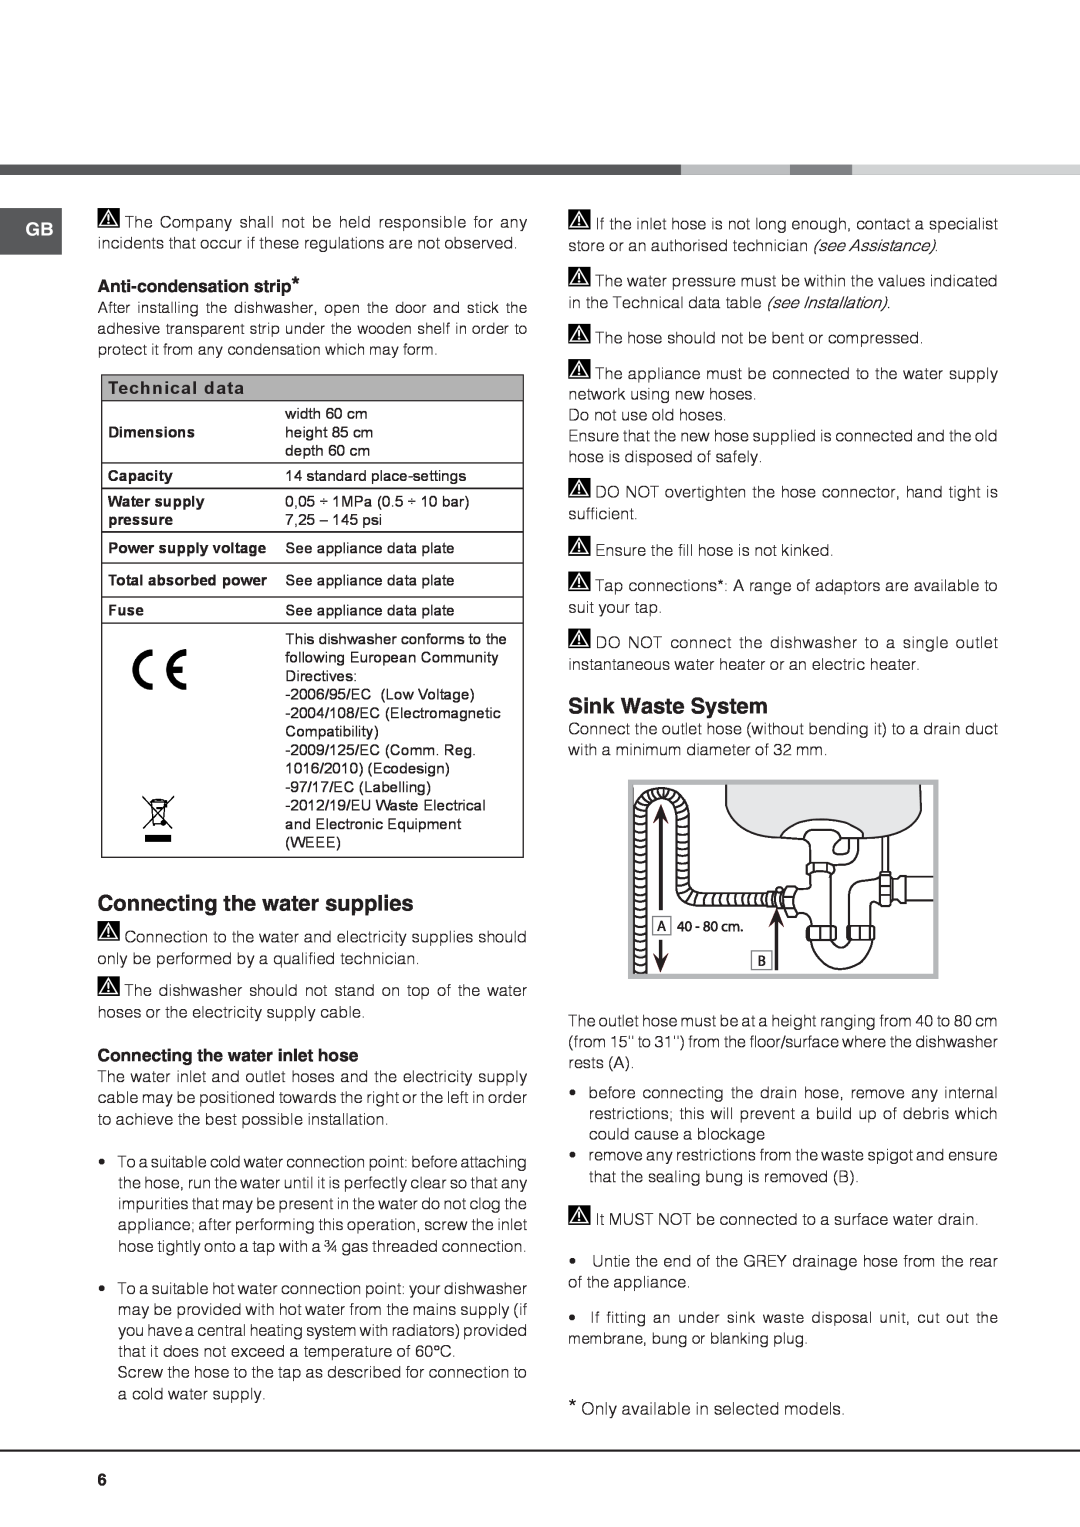 Hotpoint fdeb 31010 manual Connecting the water supplies, Sink Waste System, Anti-condensationstrip, Technical data 